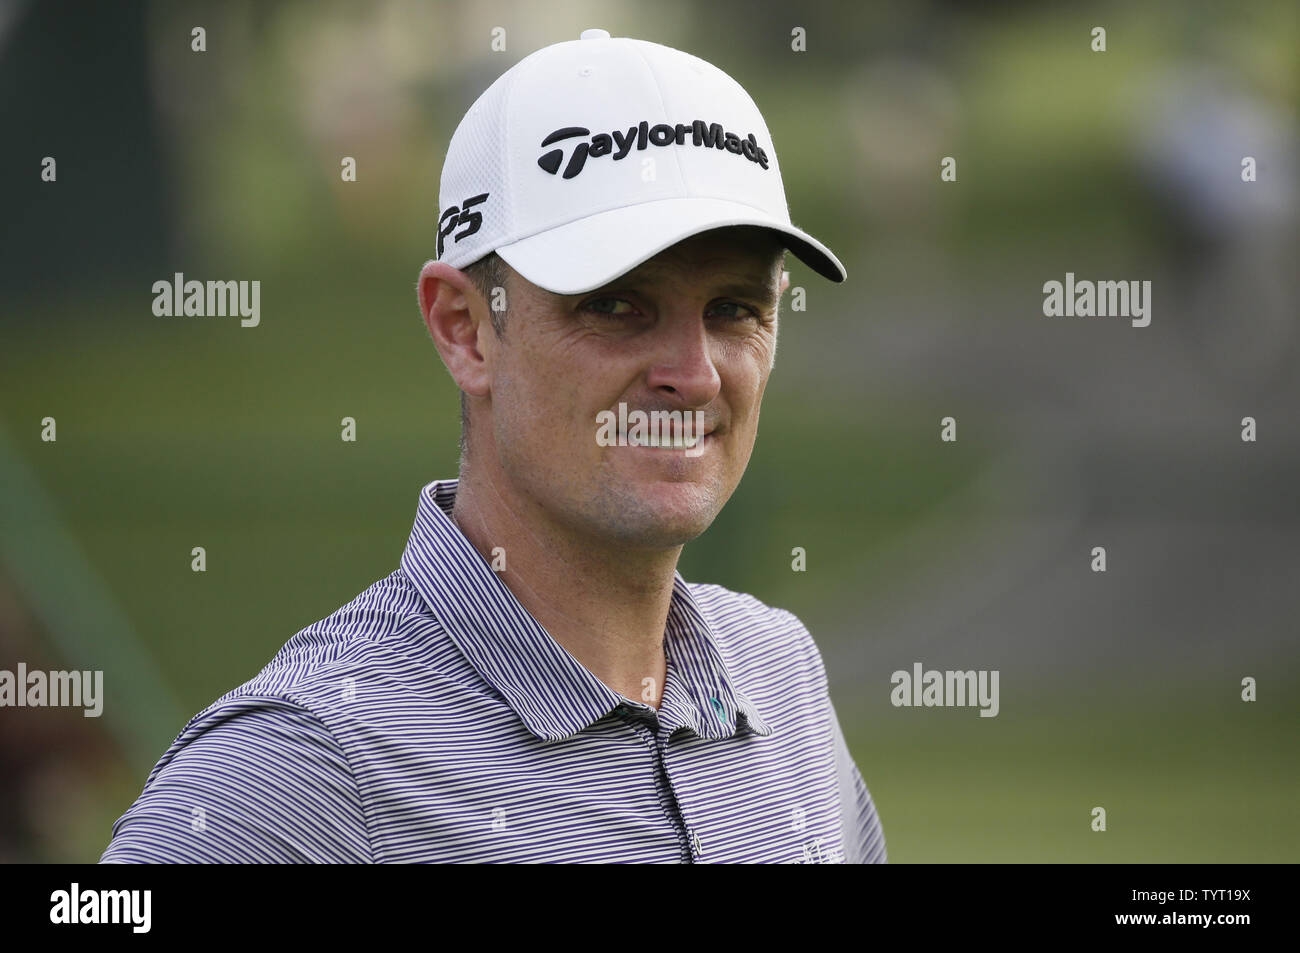 Justin Rose of England stands on the practice green at a practice round before The Northern Trust golf championship at the Glen Oaks Club in Old Westbury, New York on August 22, 2017. Glen Oaks Club is hosting THE NORTHERN TRUST for the first time.     Photo by John Angelillo/UPI Stock Photo